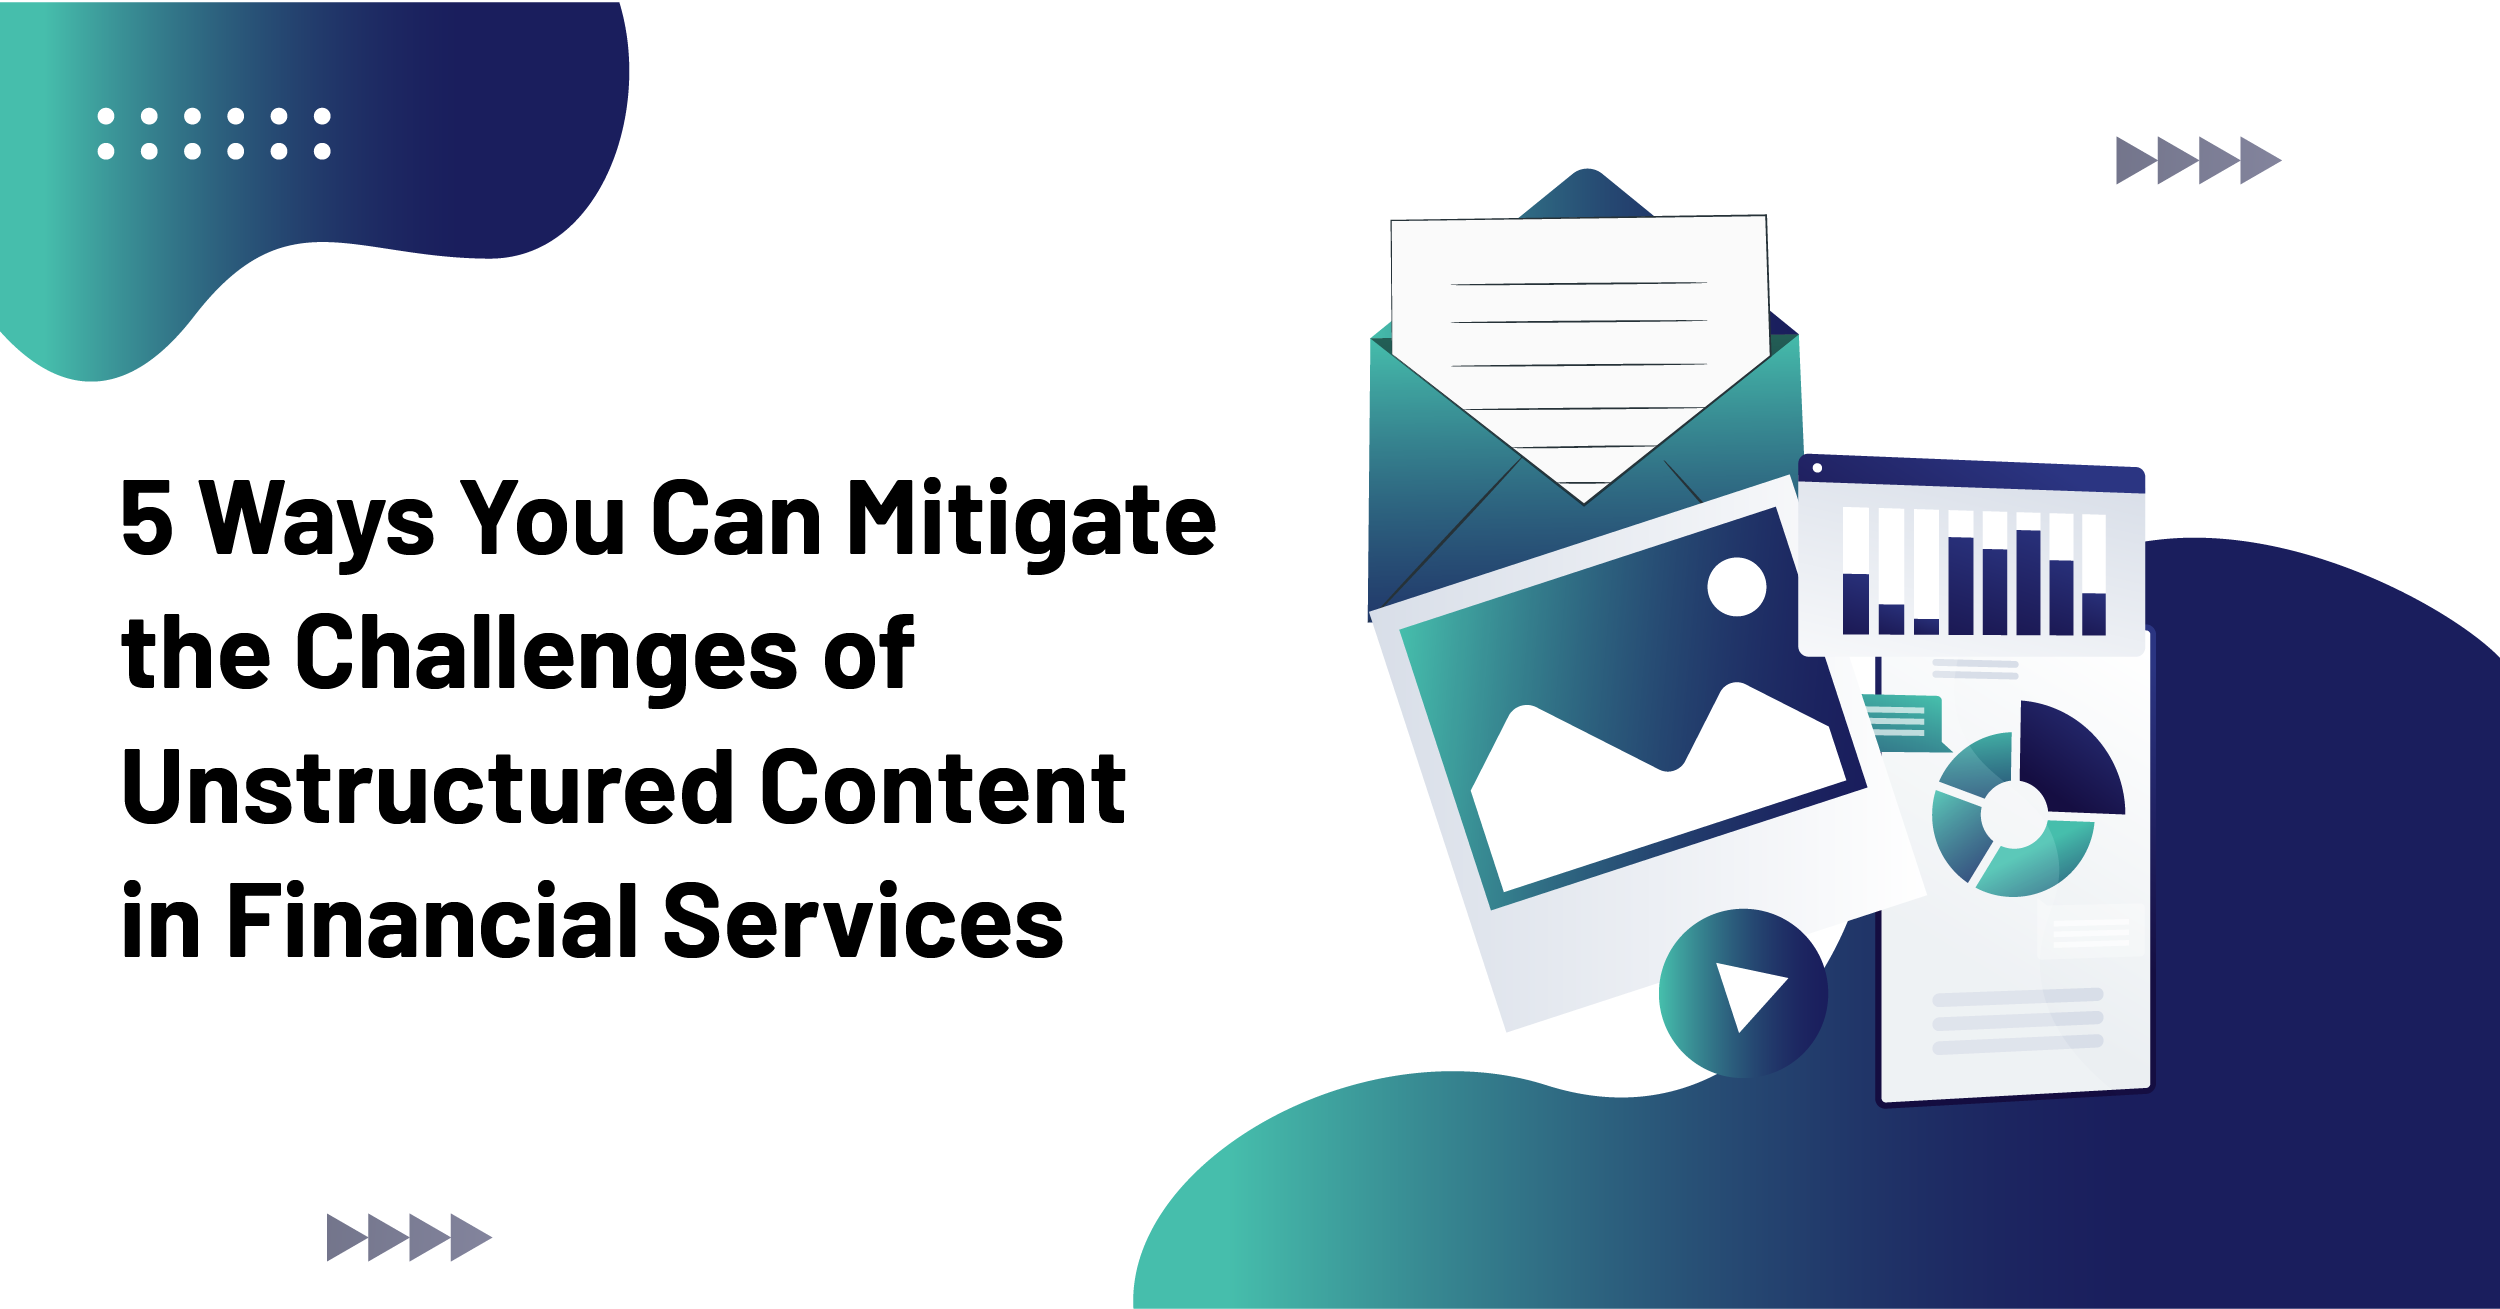 Unstructured Content in Financial Services